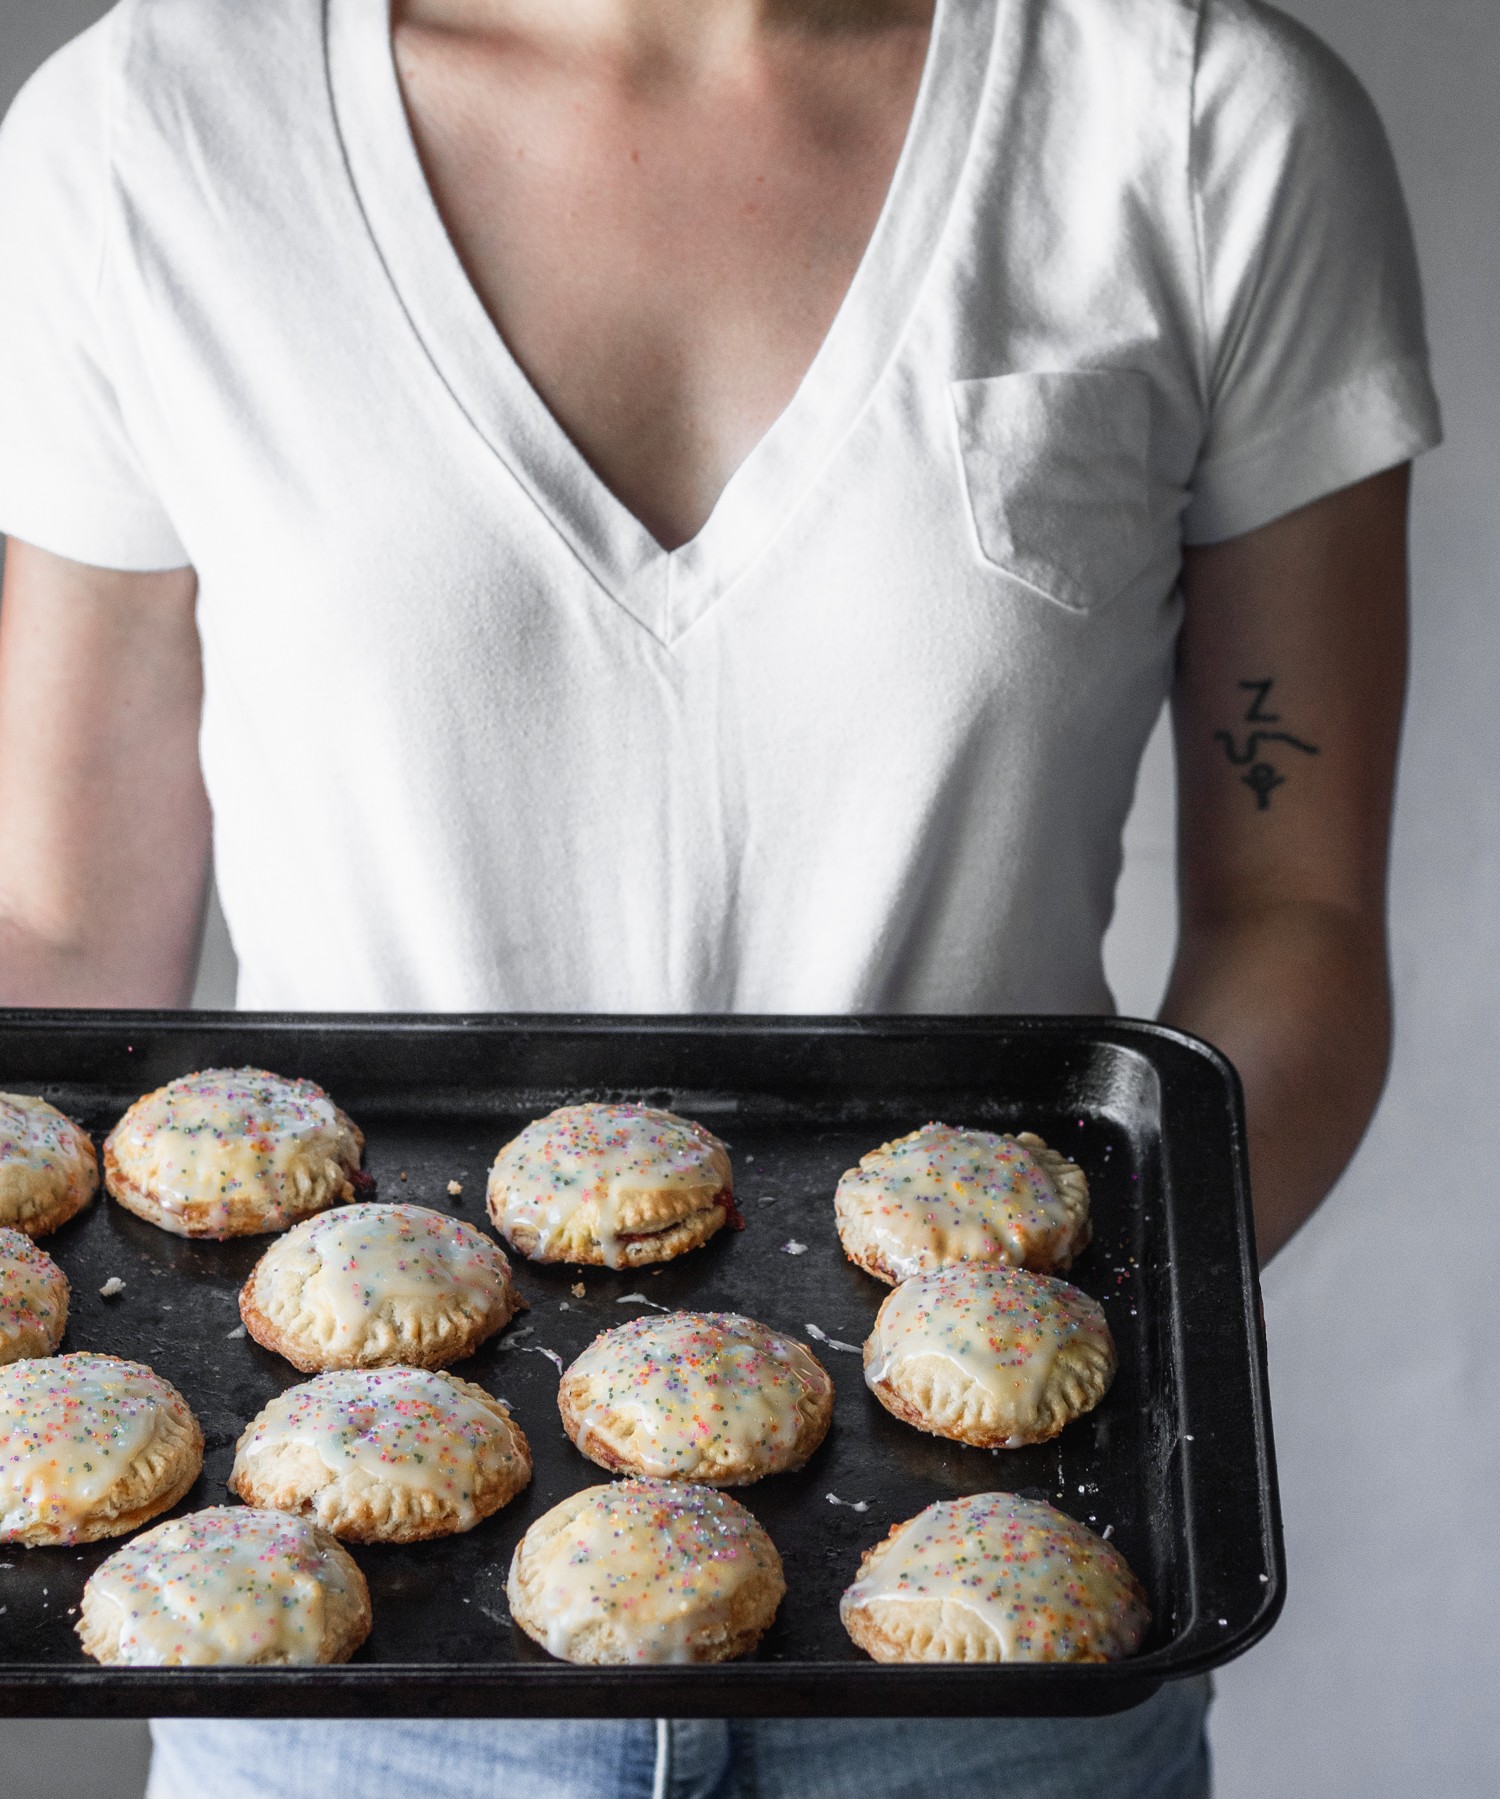 A woman holding a sheet pan with strawberry balsamic hand pies.